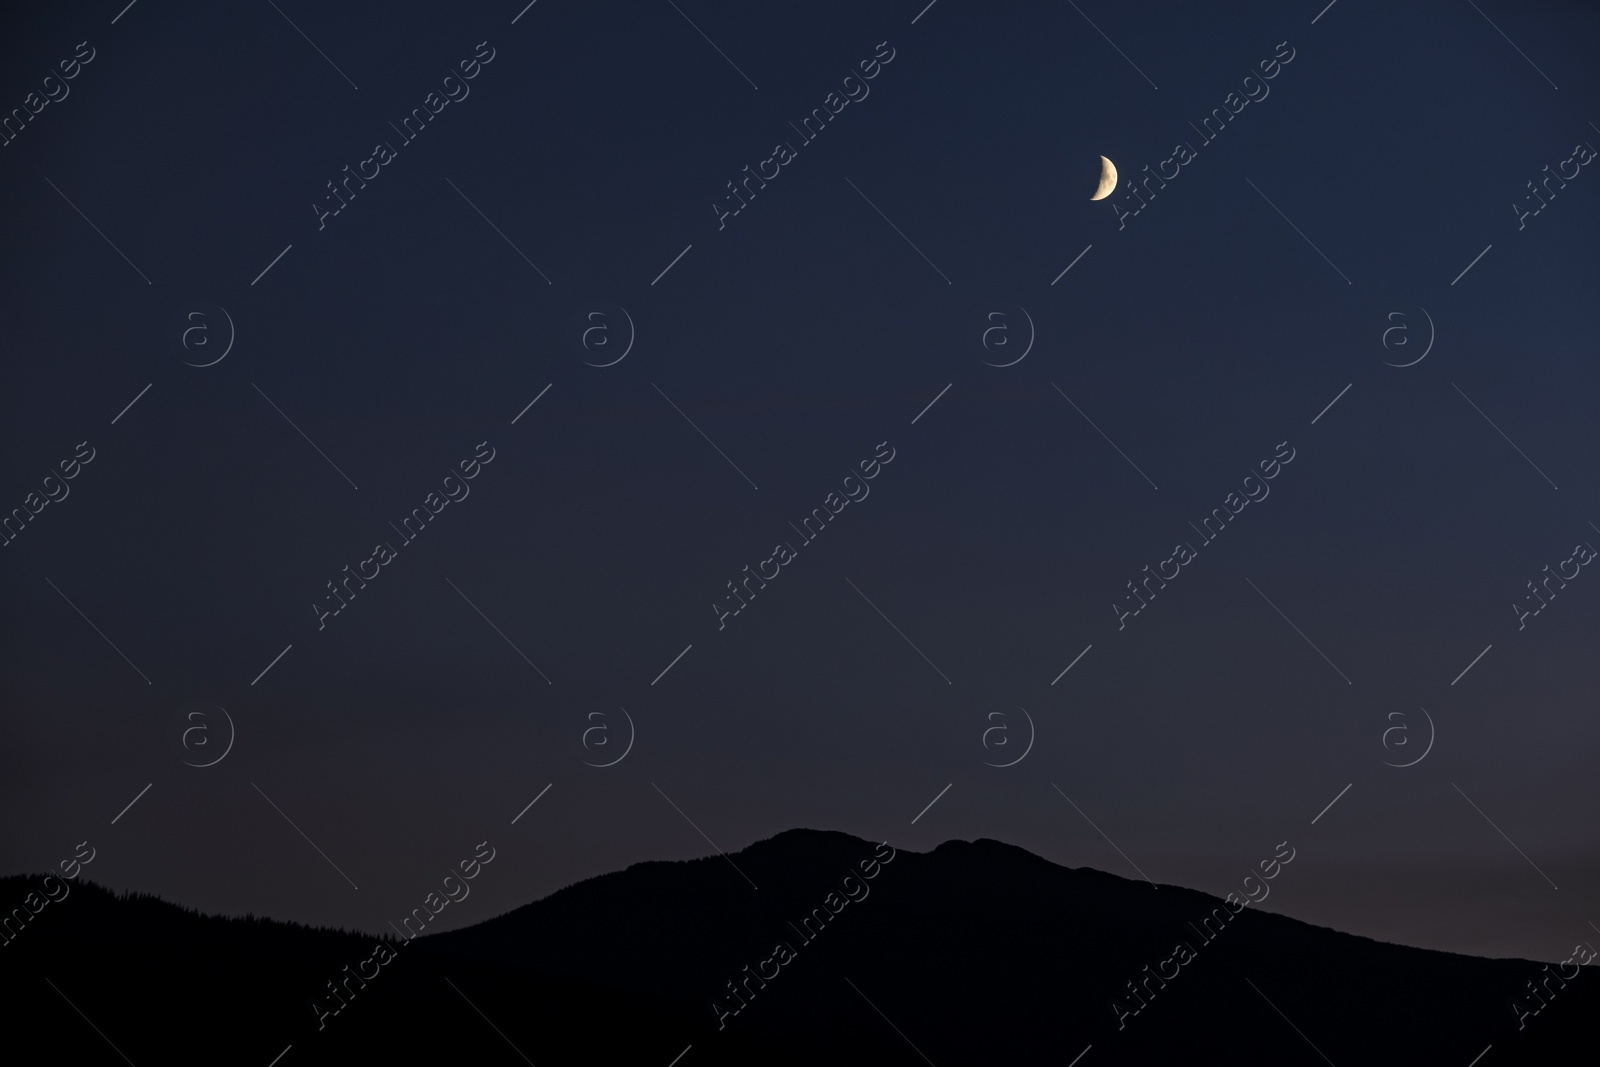 Photo of Bright crescent in dark sky over mountains